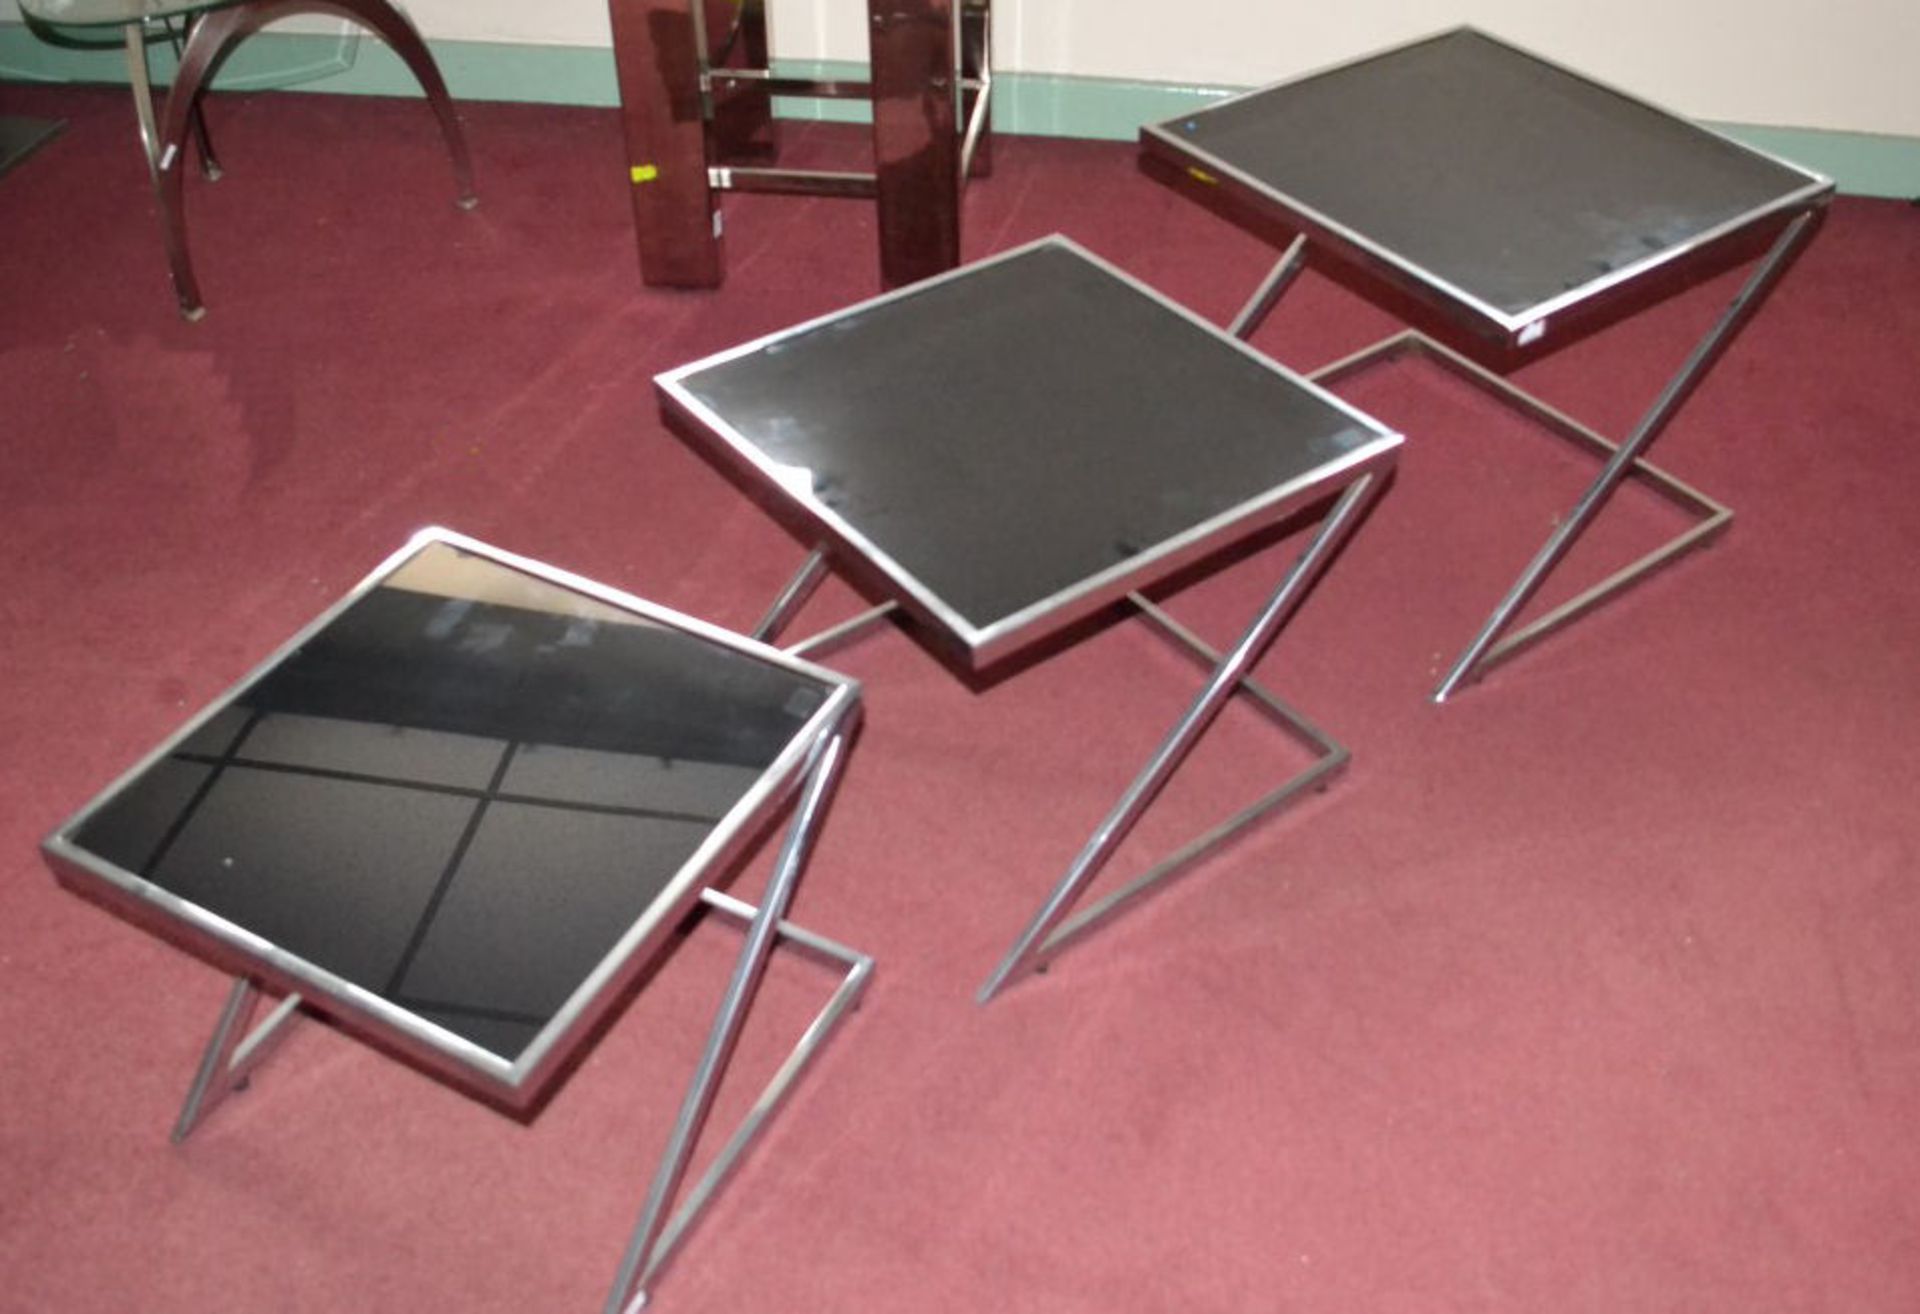 1 x Set Of 3 Z-Shape Nesting Side Tables with Black Glass Tops - Image 3 of 3